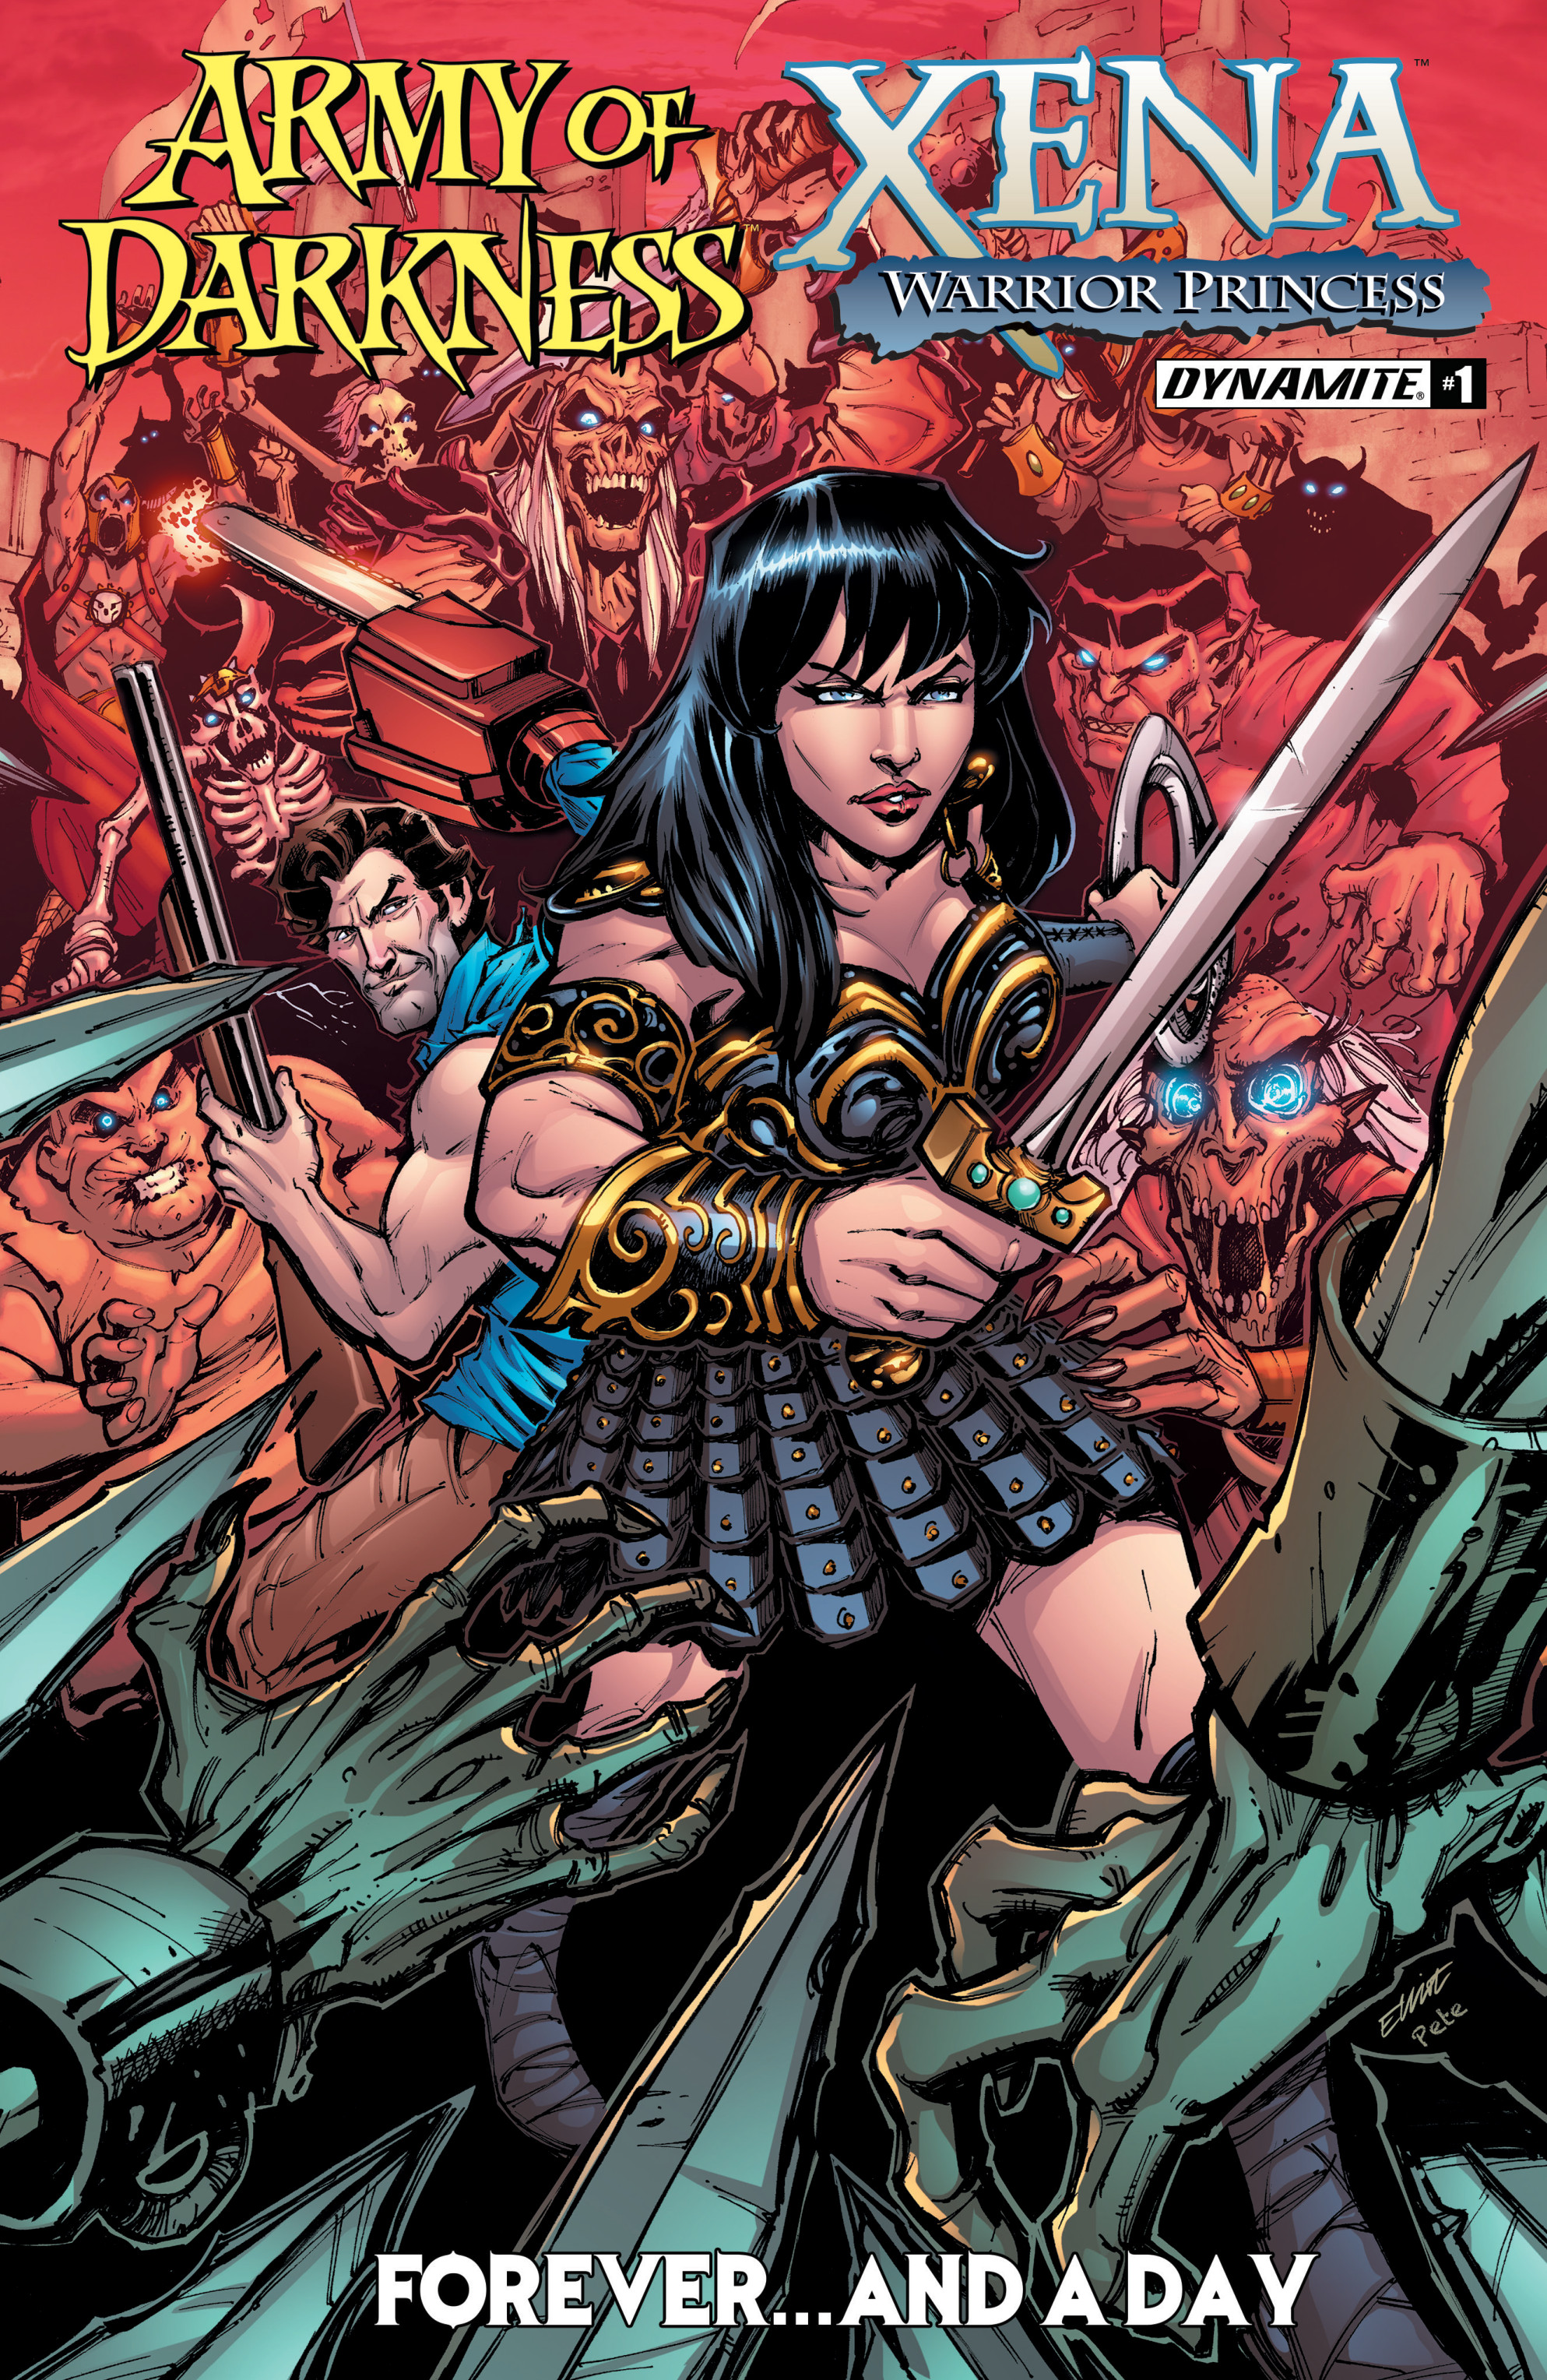 Army Of Darkness Xena Warrior Princess Forever...And A Day: Chapter 1 - Page 2